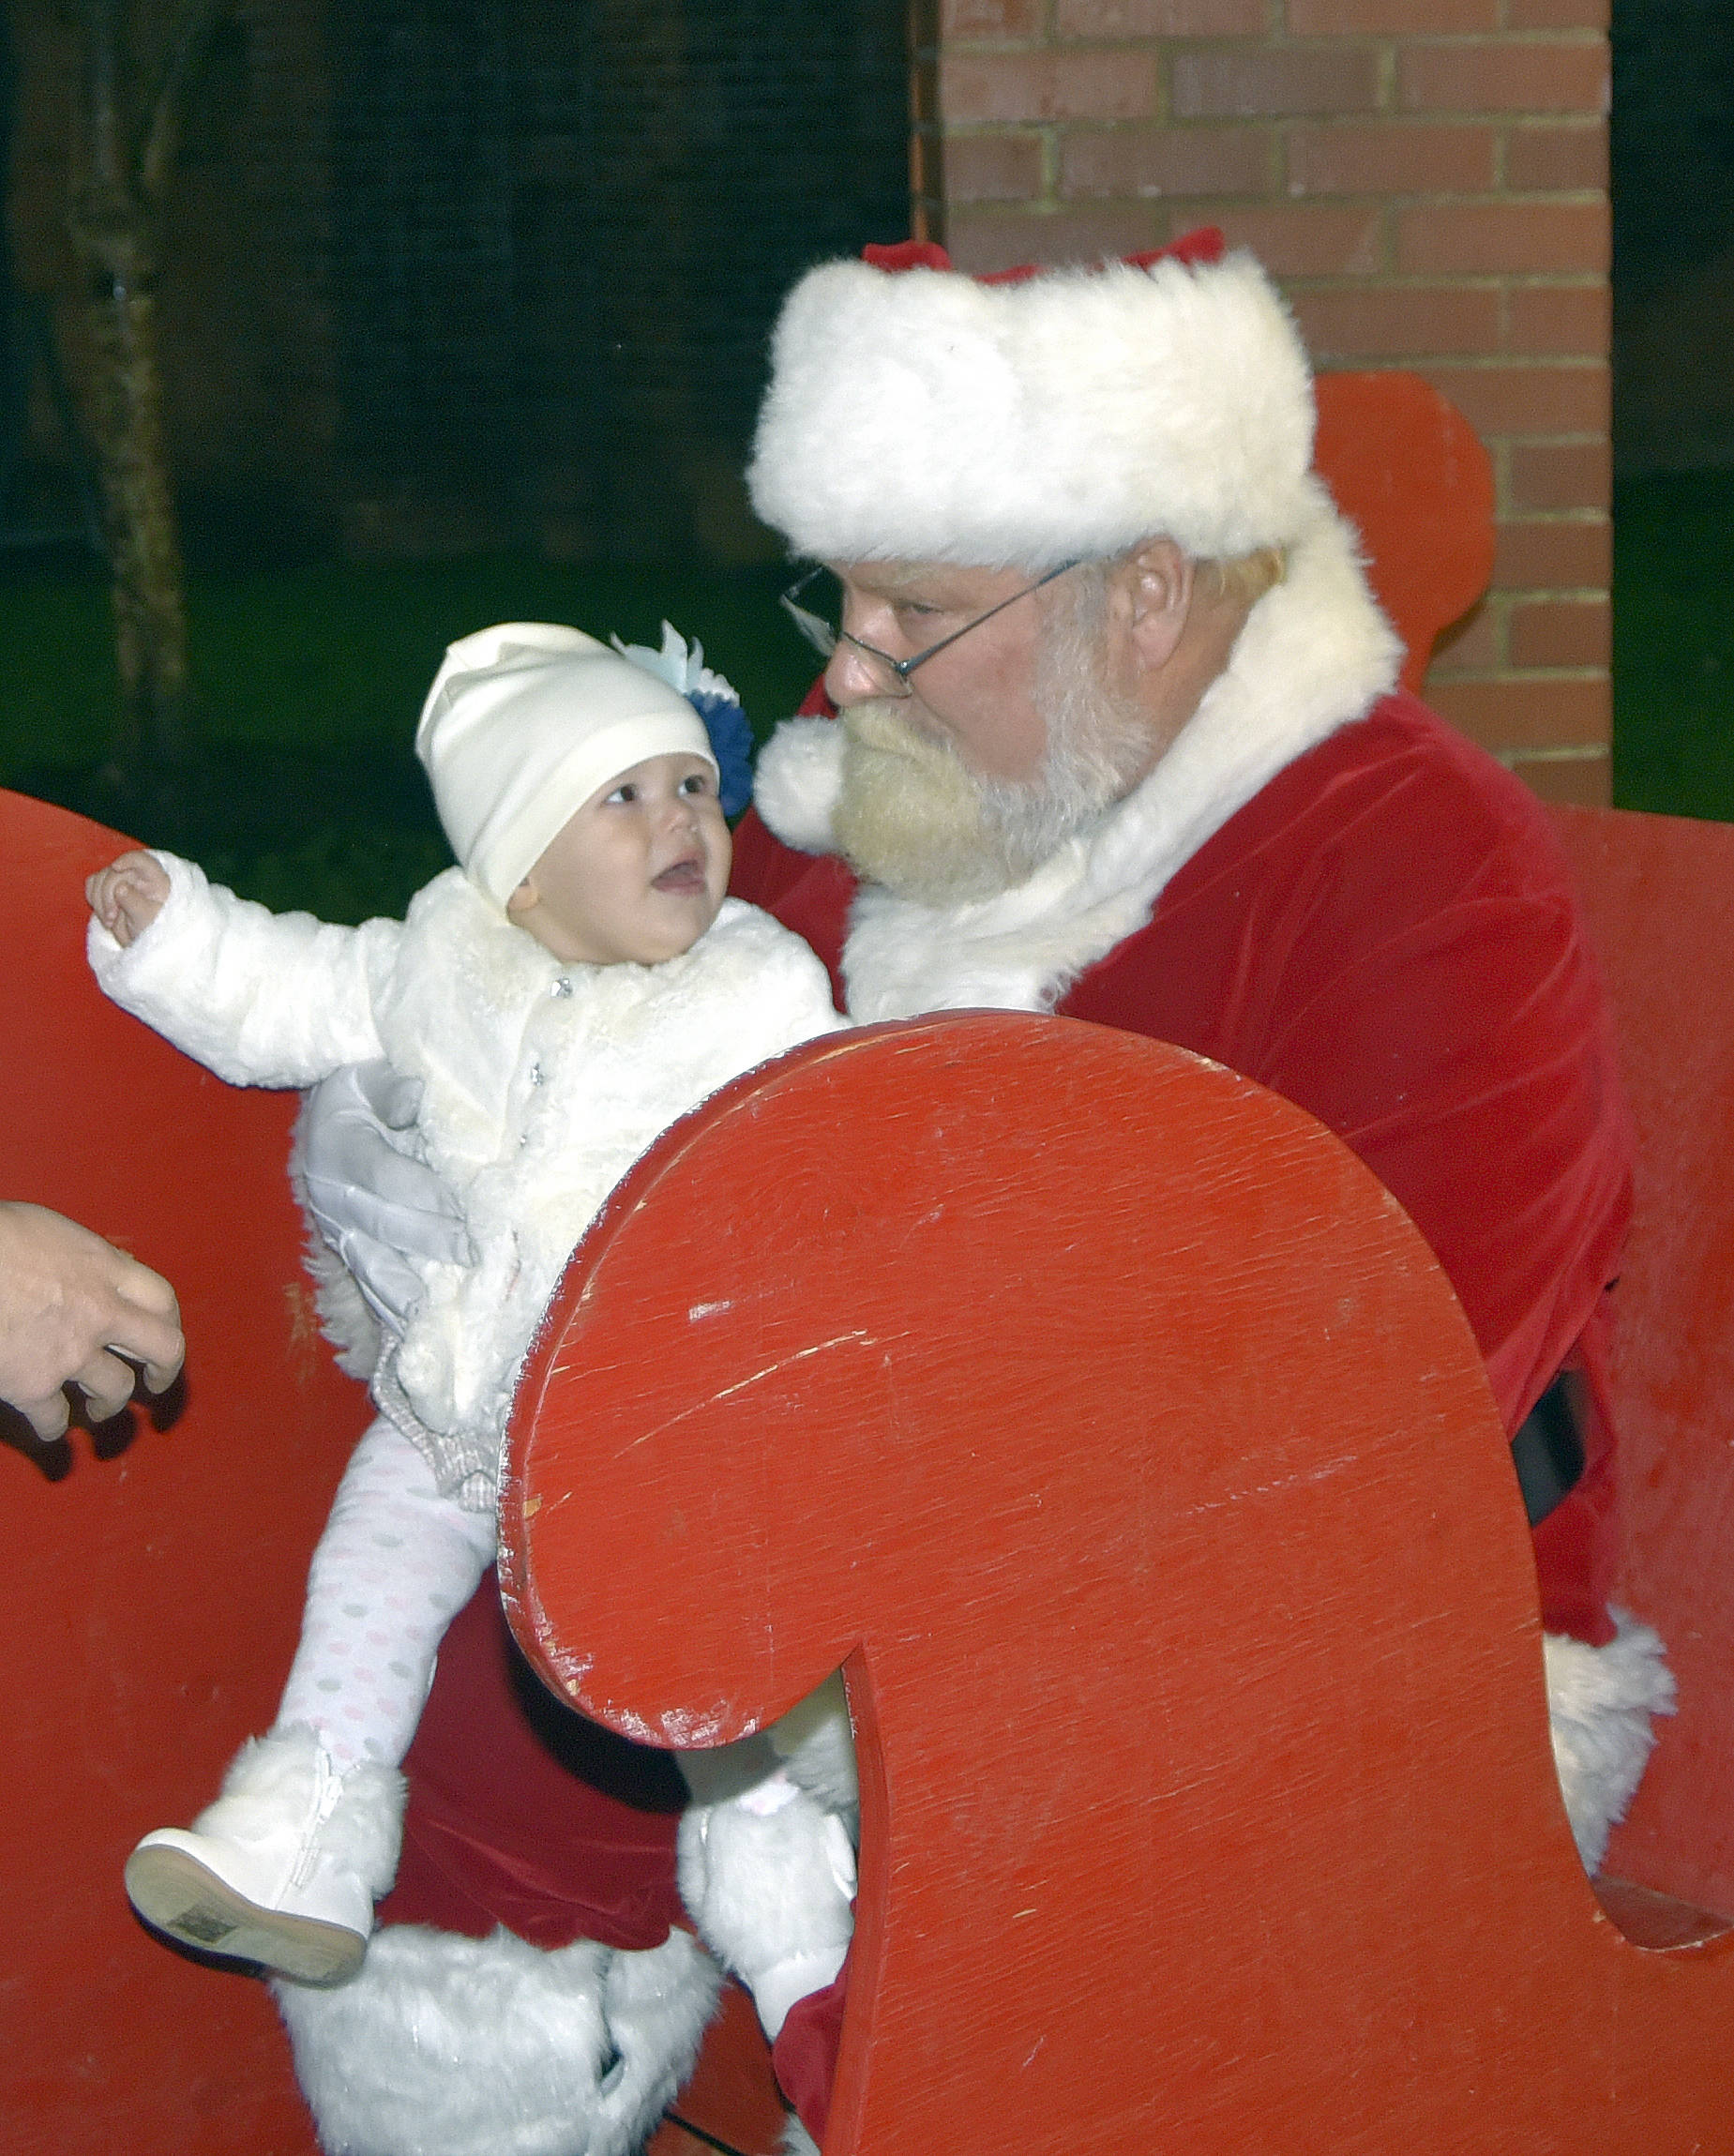 Children in Fall City will get their turns to meet with Santa Saturday during Fall City’s holiday festivities. (Carol Ladwig/File Photo)